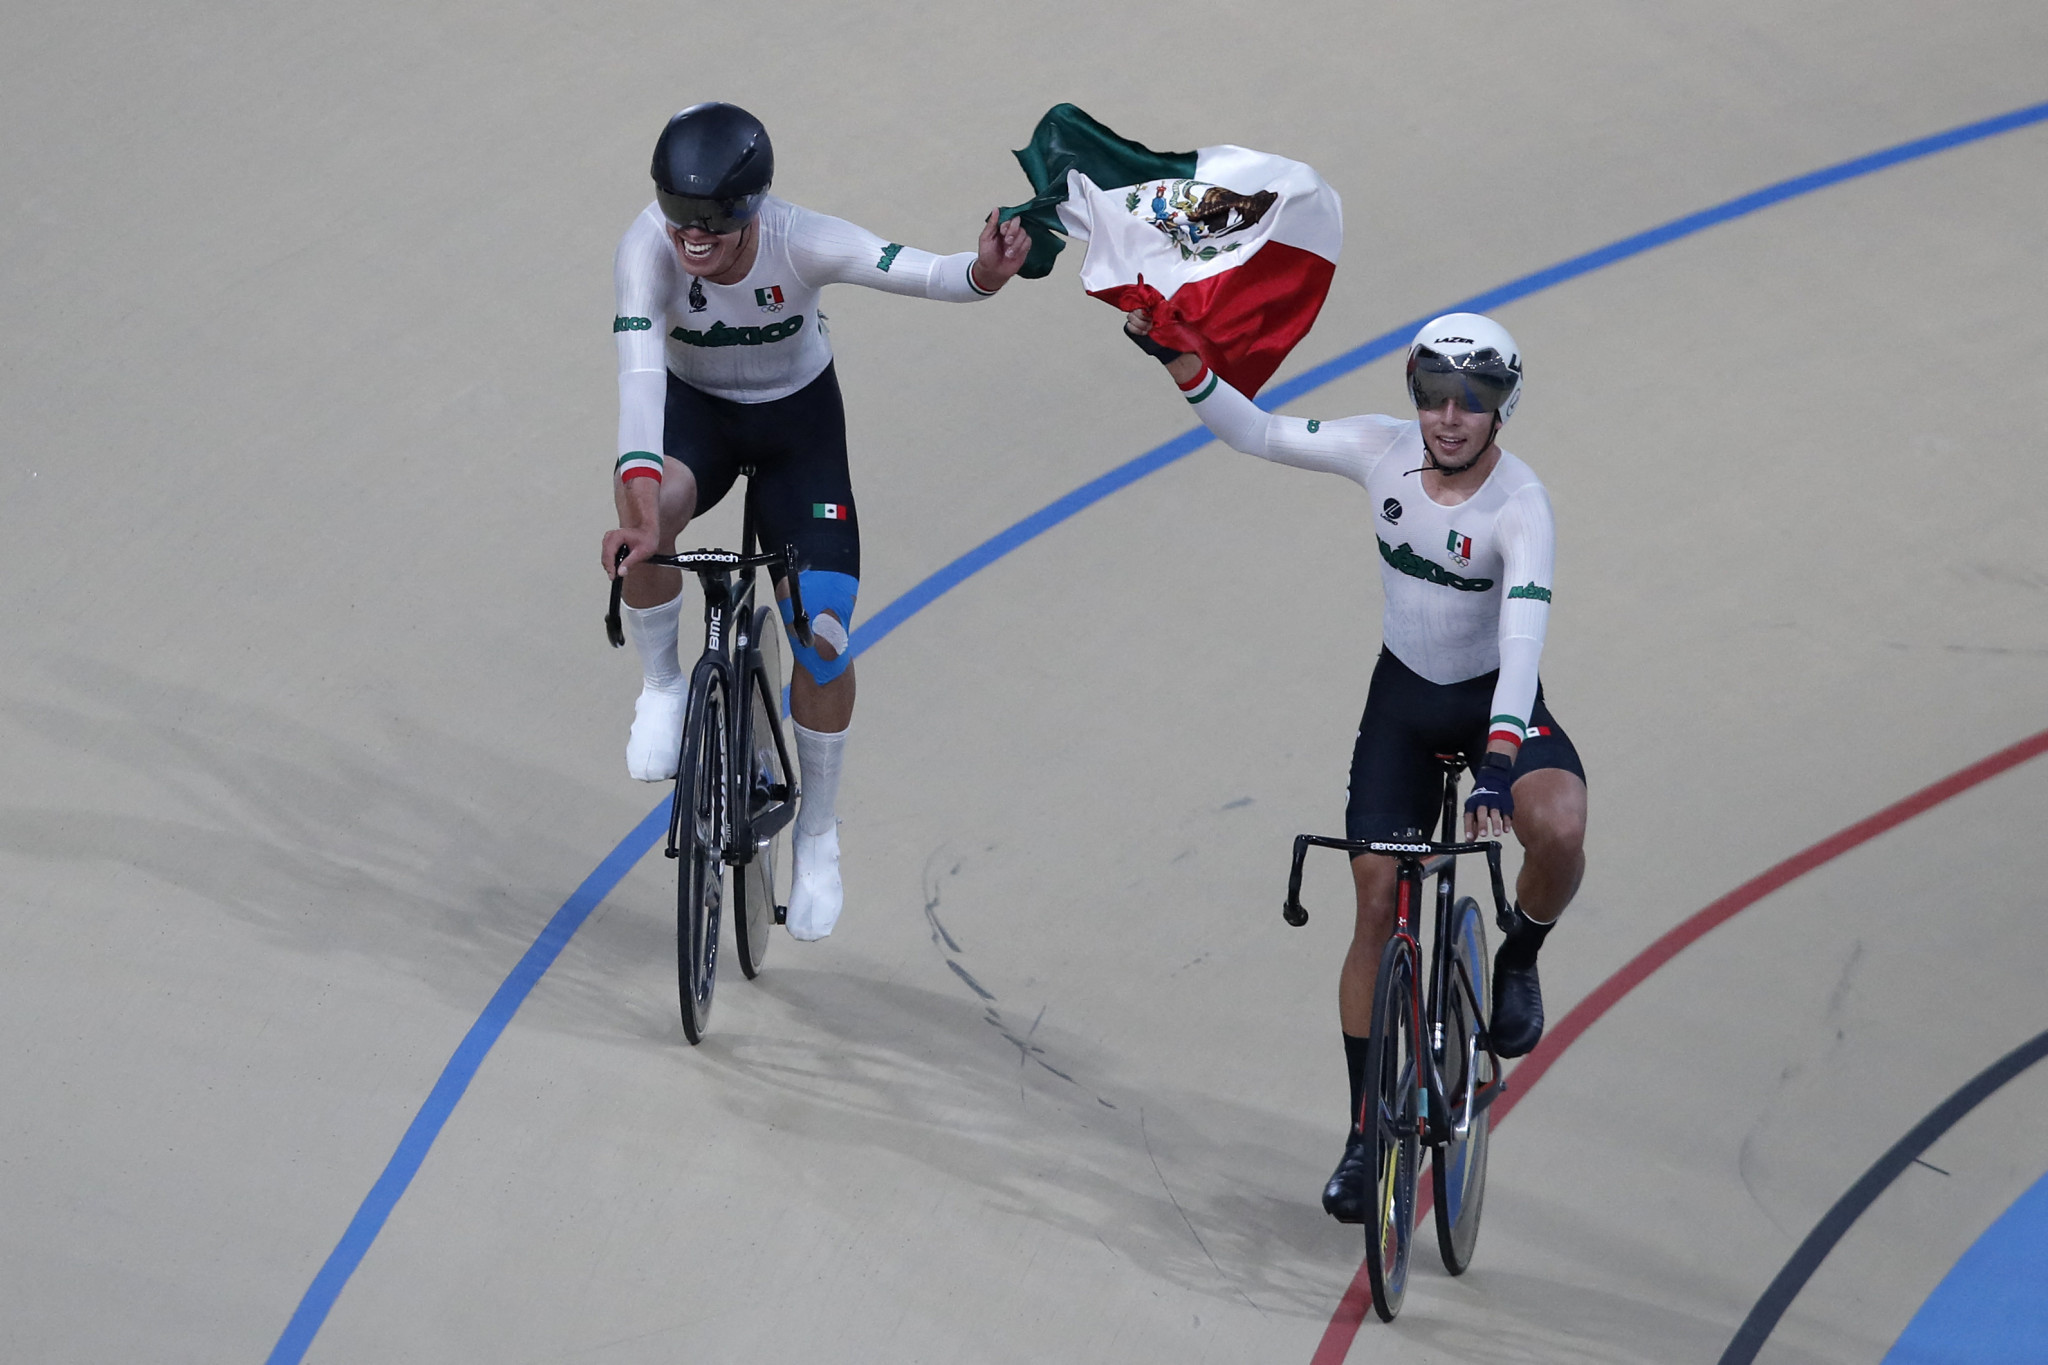 Mexicans Fernando Nava and Ricardo Peña Salas were top class in the men's madison, winning by almost double the points in 90 ©Getty Images